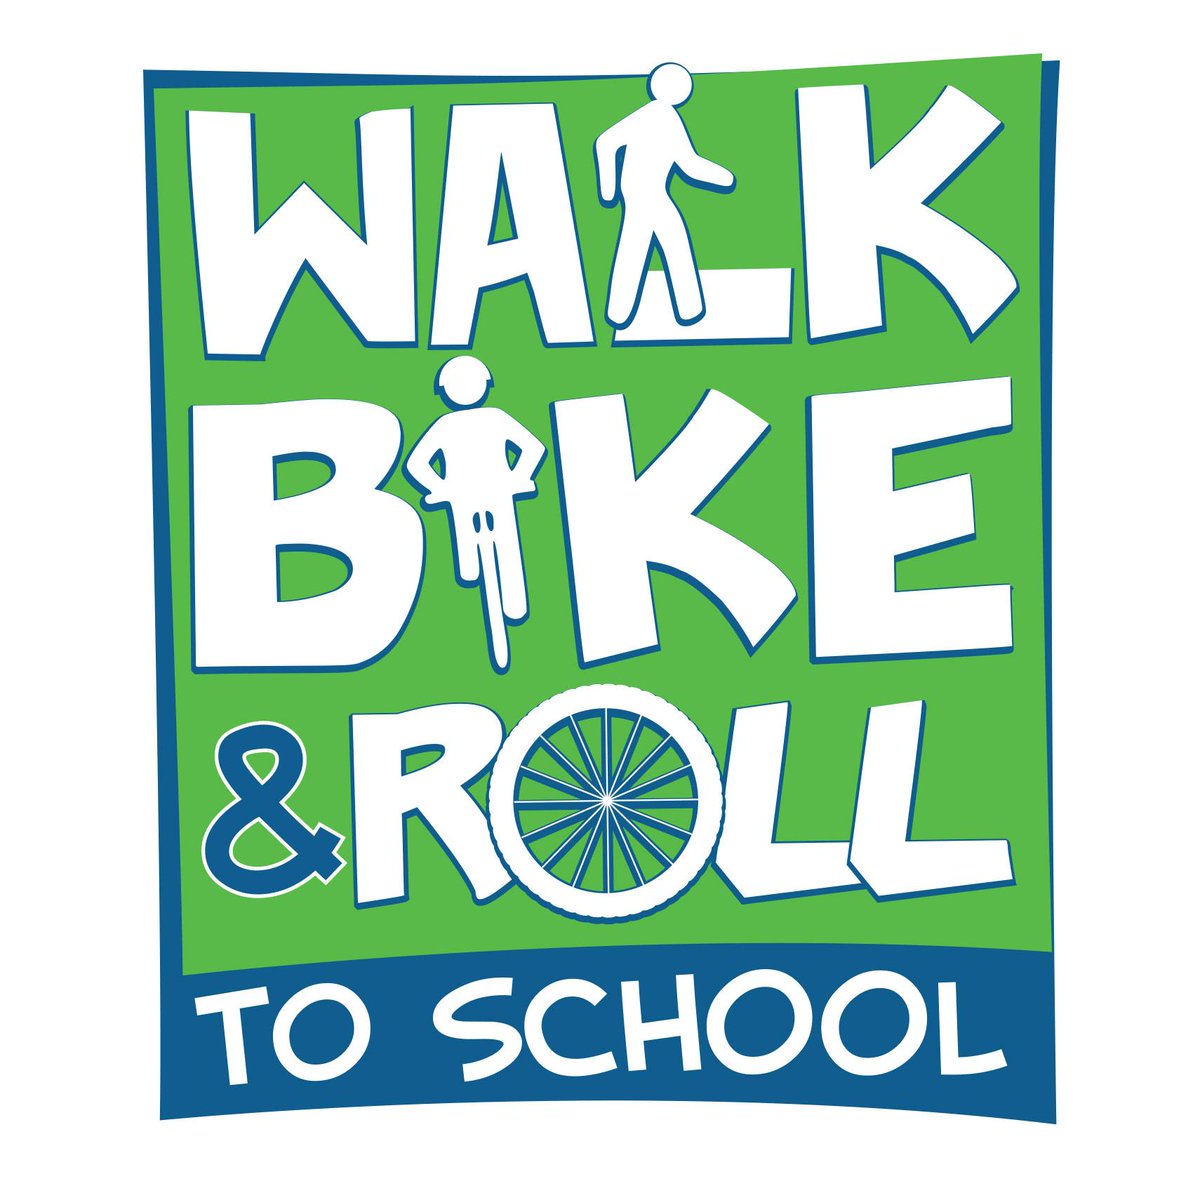 TOMORROW! Wednesday, May 8, is Walk, Bike and Roll to School Day. Please exercise caution and be mindful of additional pedestrian traffic in our neighborhoods and school communities. Thanks for your support in keeping our students safe! #RCSpride